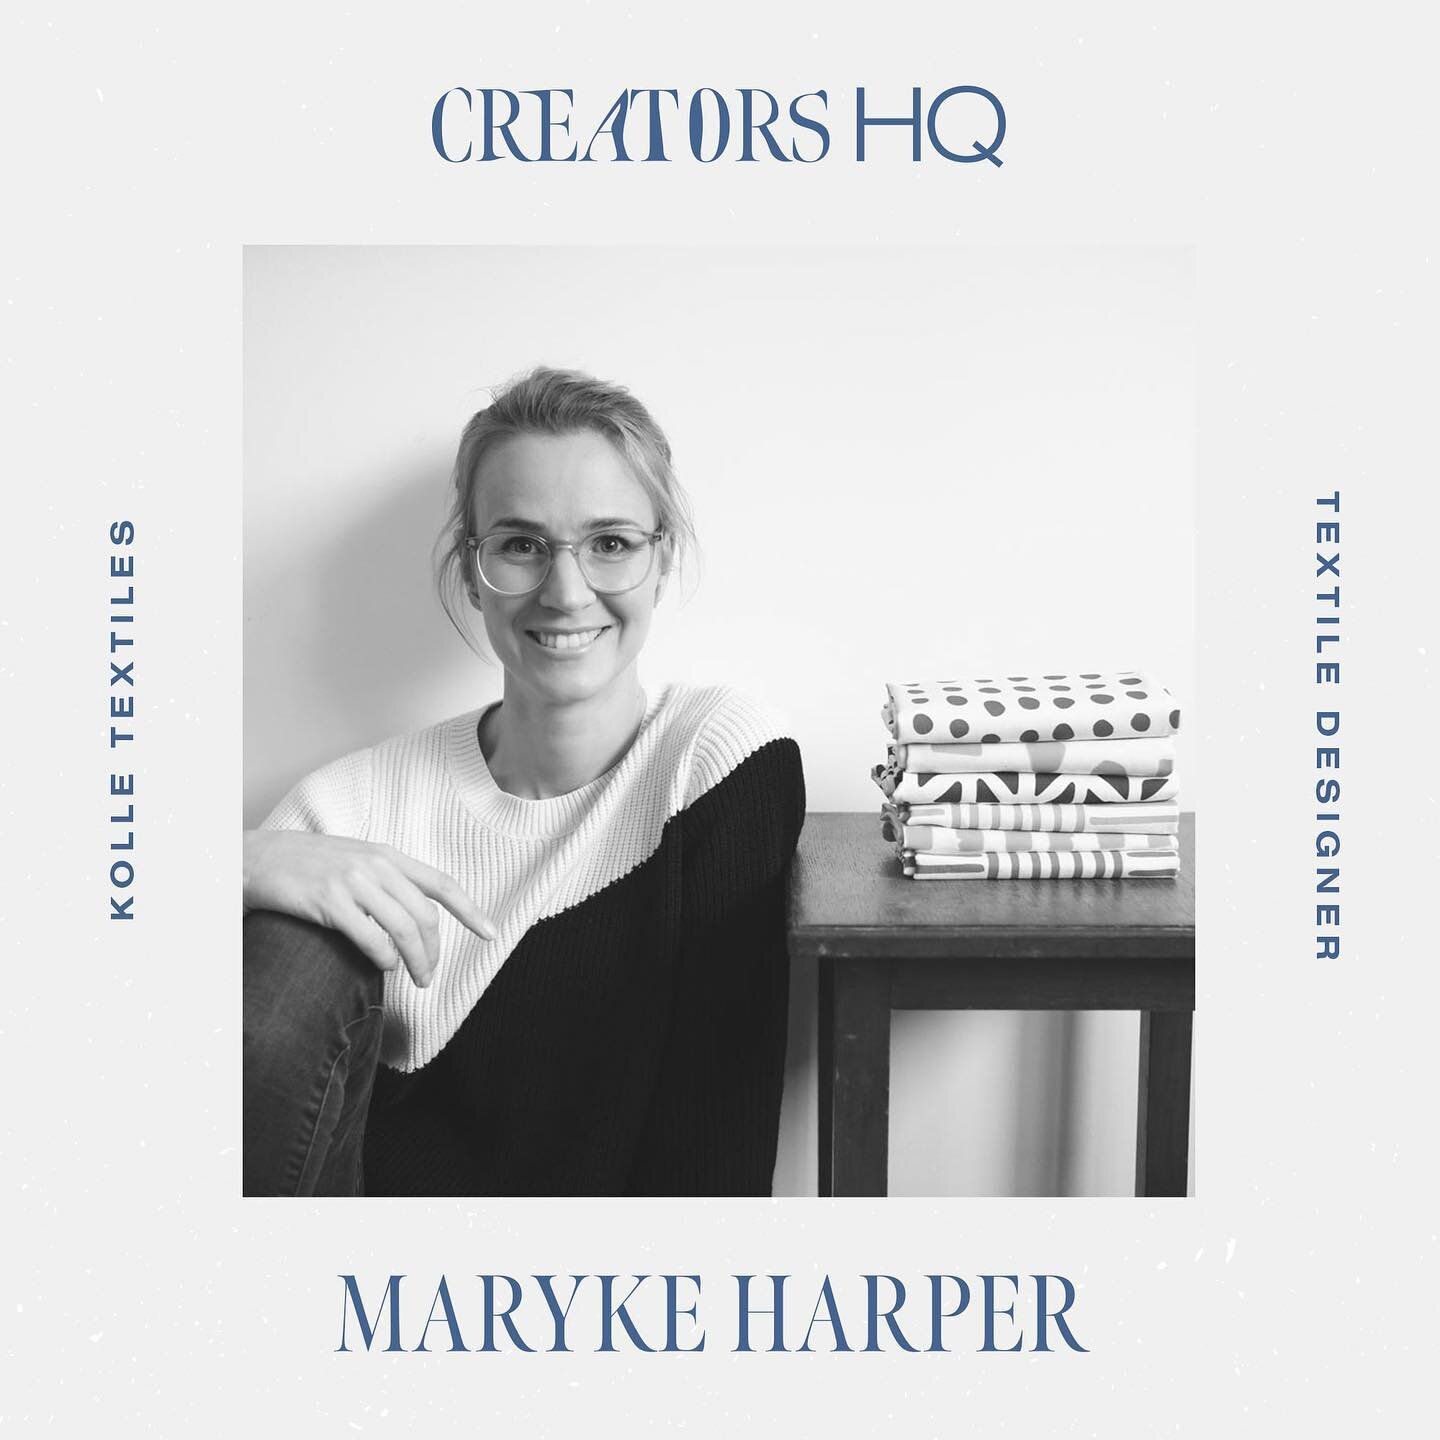 Say hello to Maryke Harper is the creator and owner at @kolle_textiles where the aim is to create gorgeous, high-quality products using her own original designs. She&rsquo;s passionate about the environment and for that reason, she has sourced 100% c